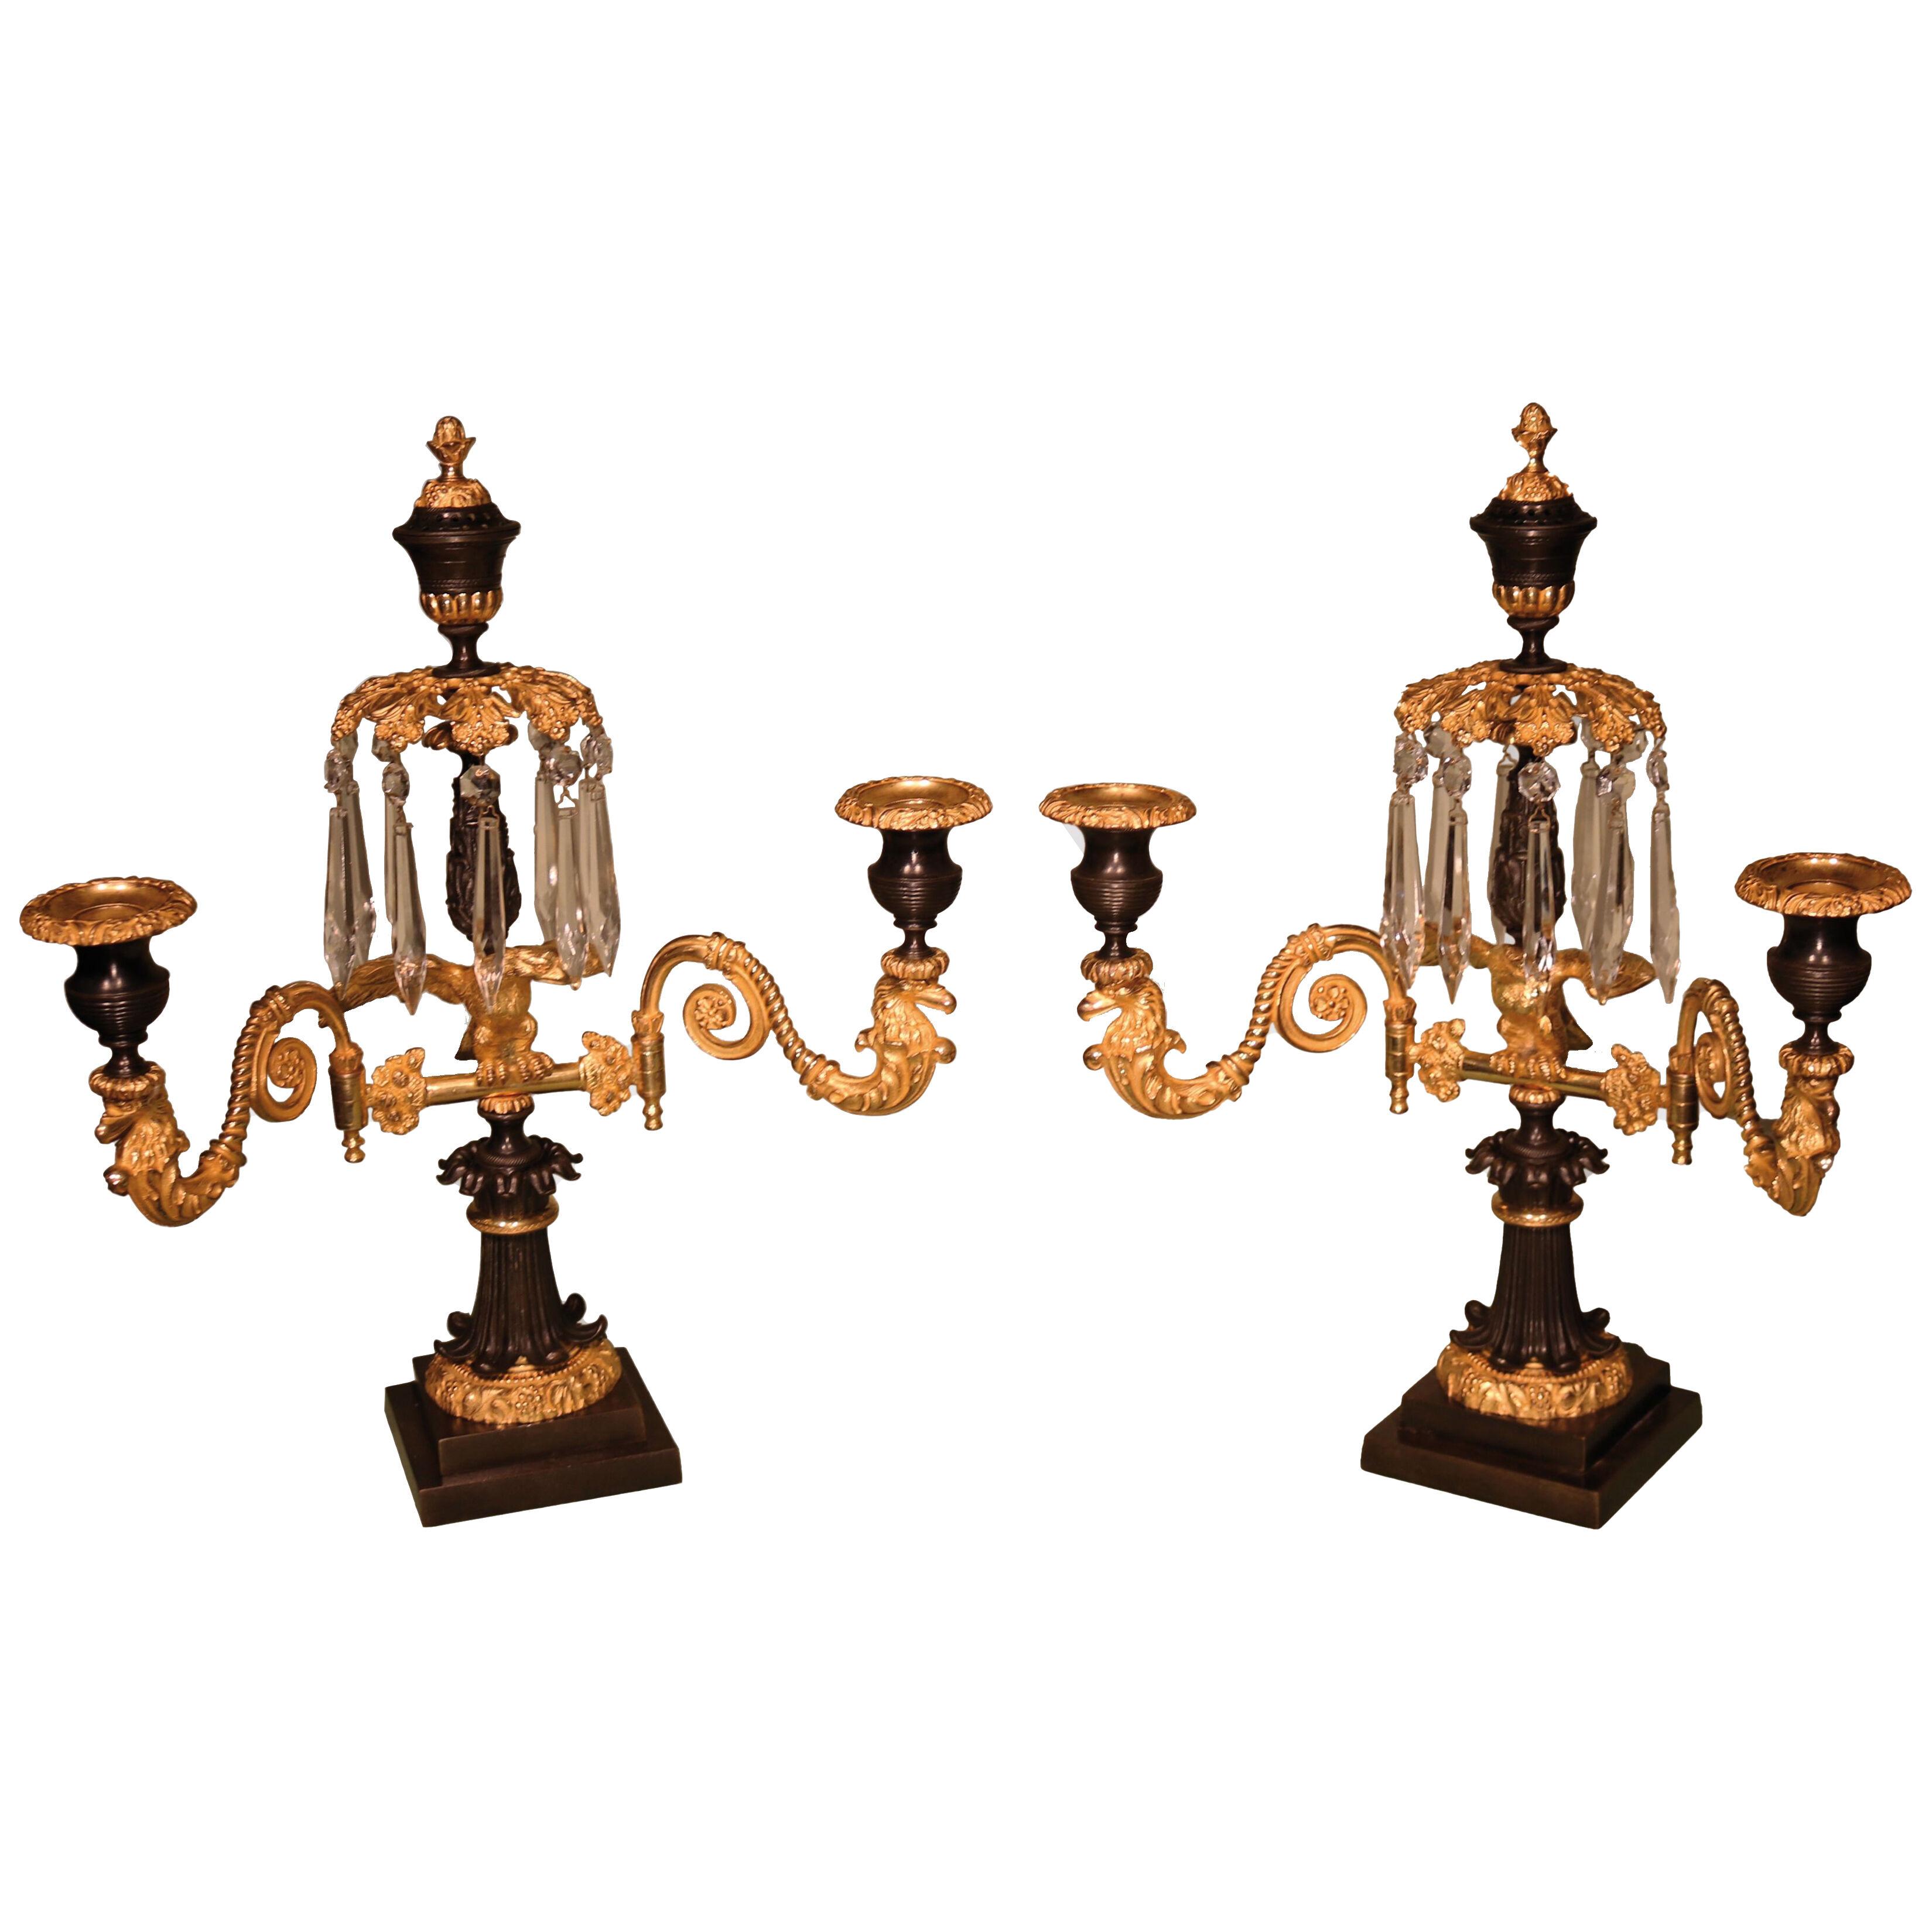 A Pair of 19th century Regency period bronze and ormolu two light candelabra